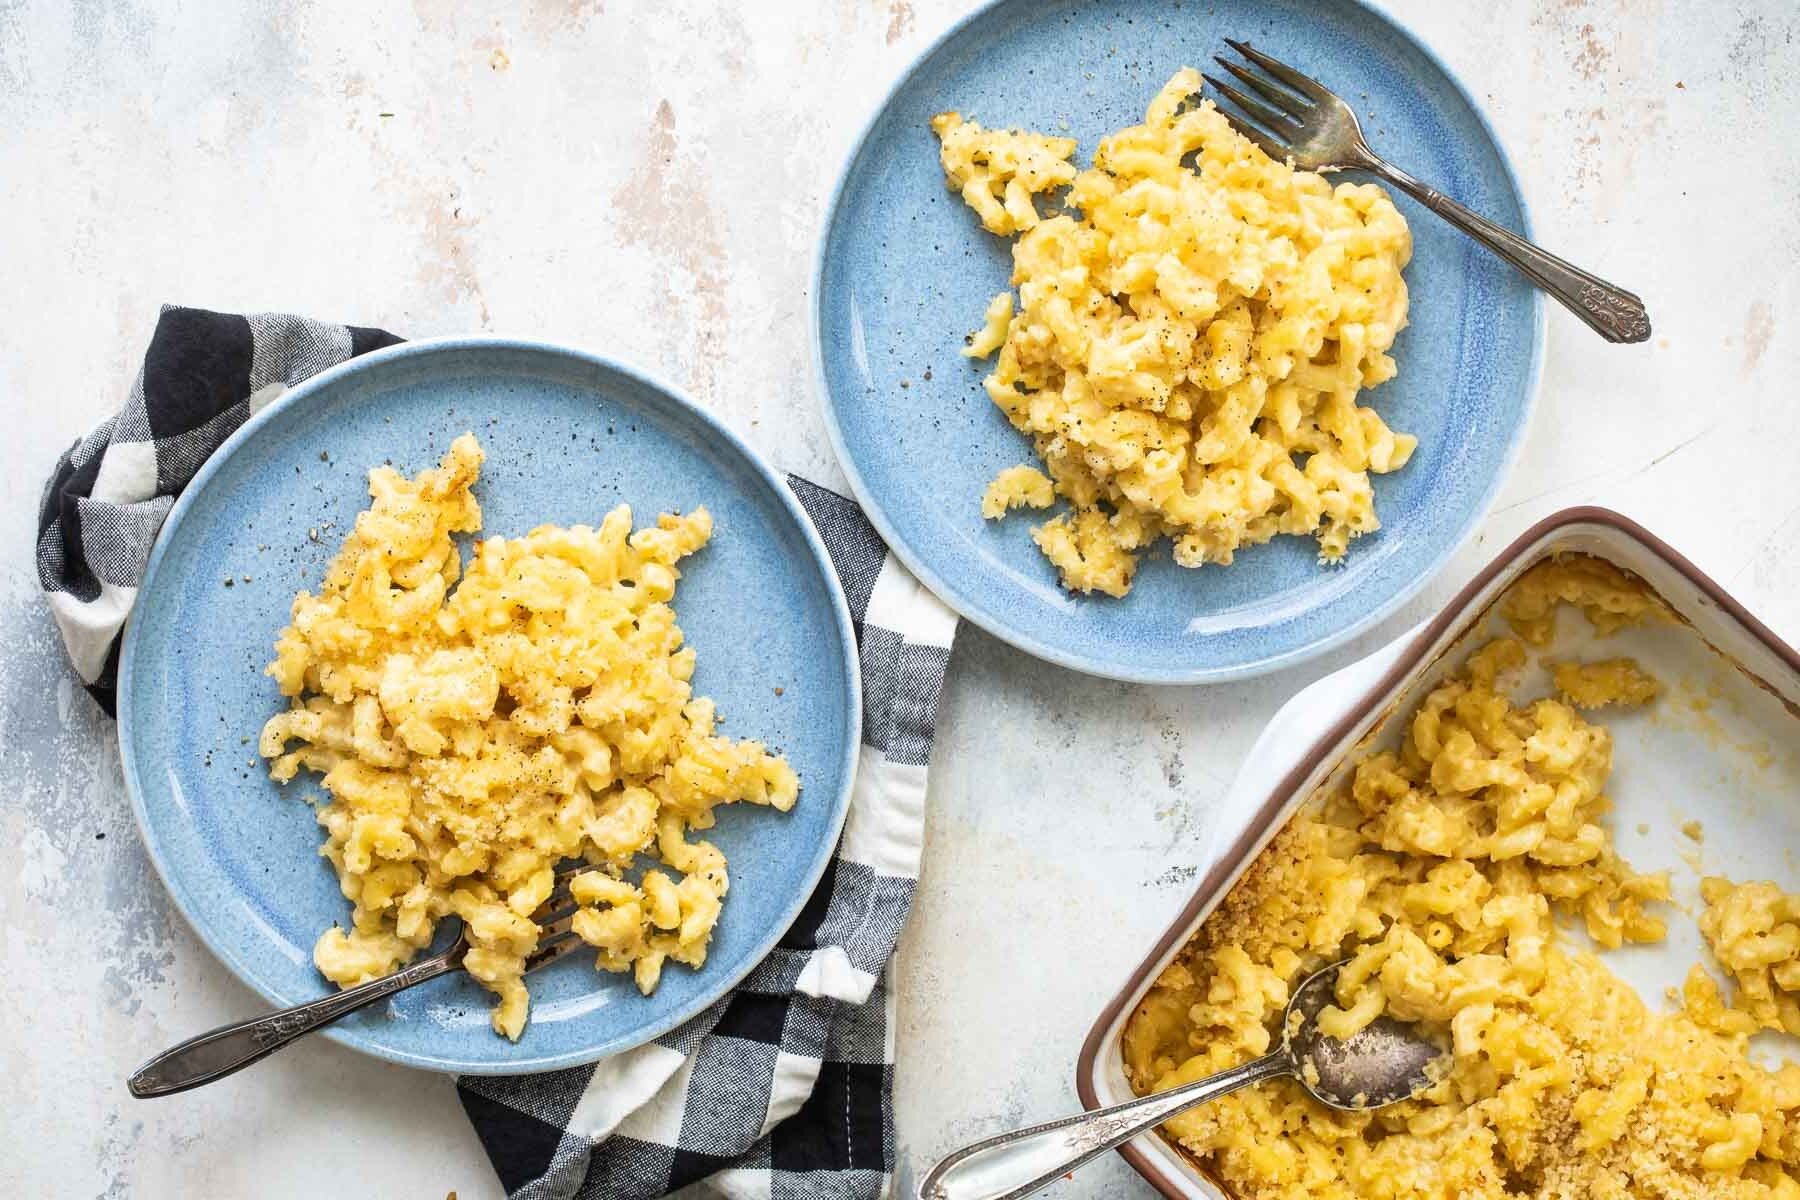 Two plates of macaroni and cheese.